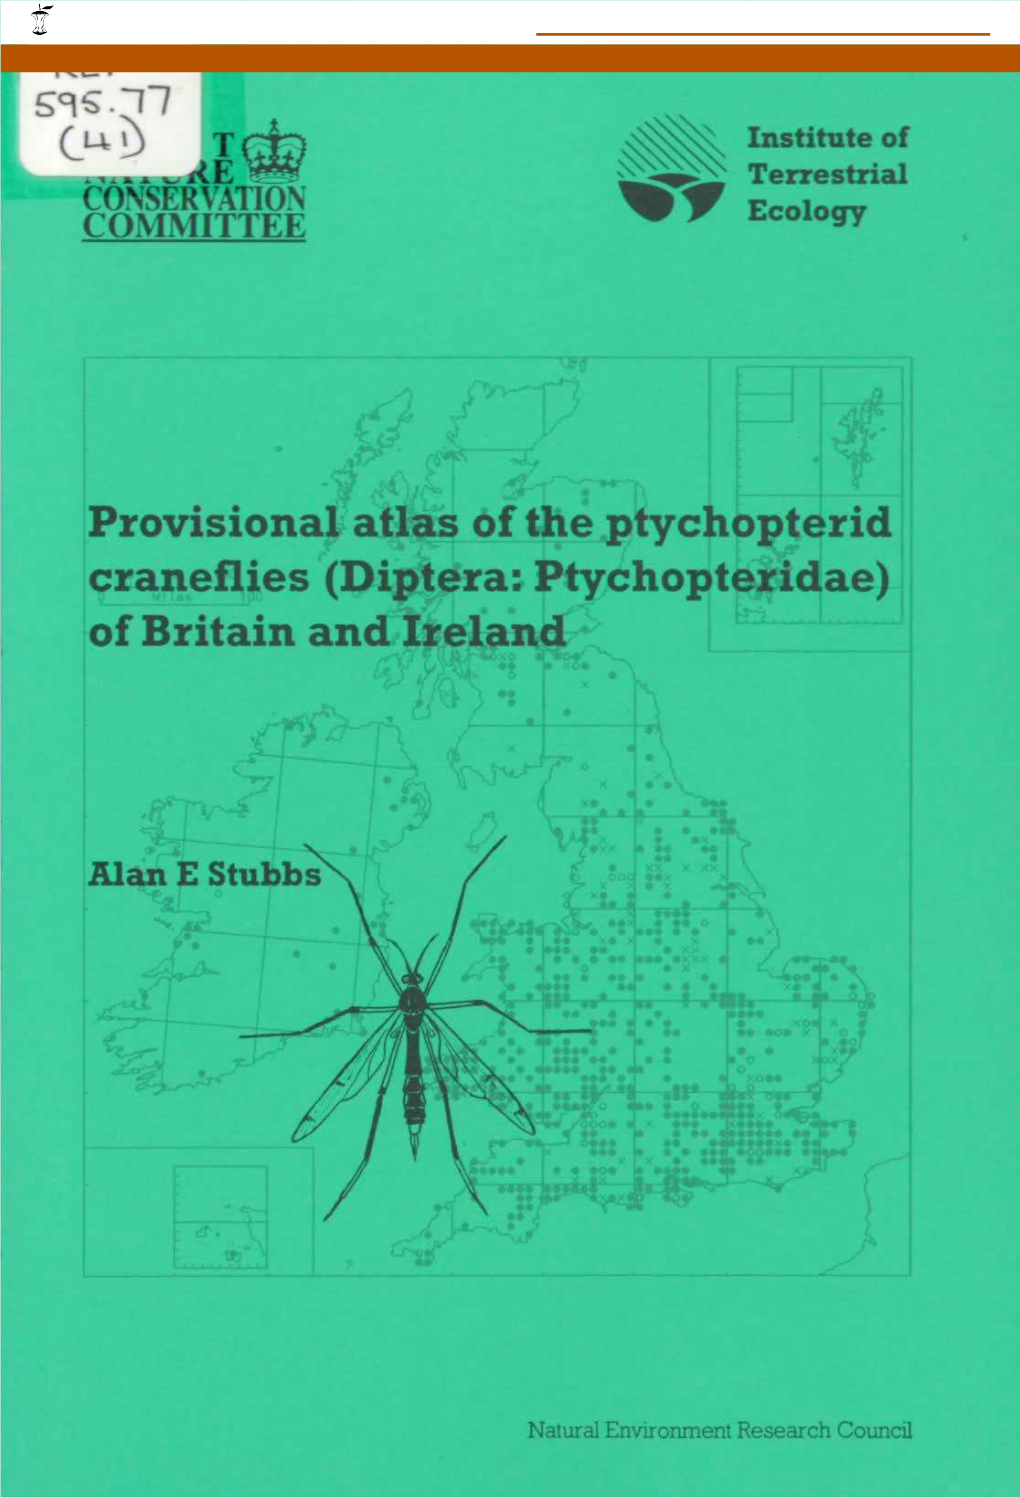 Diptera: Ptychopteridae) of Britain and Ireland